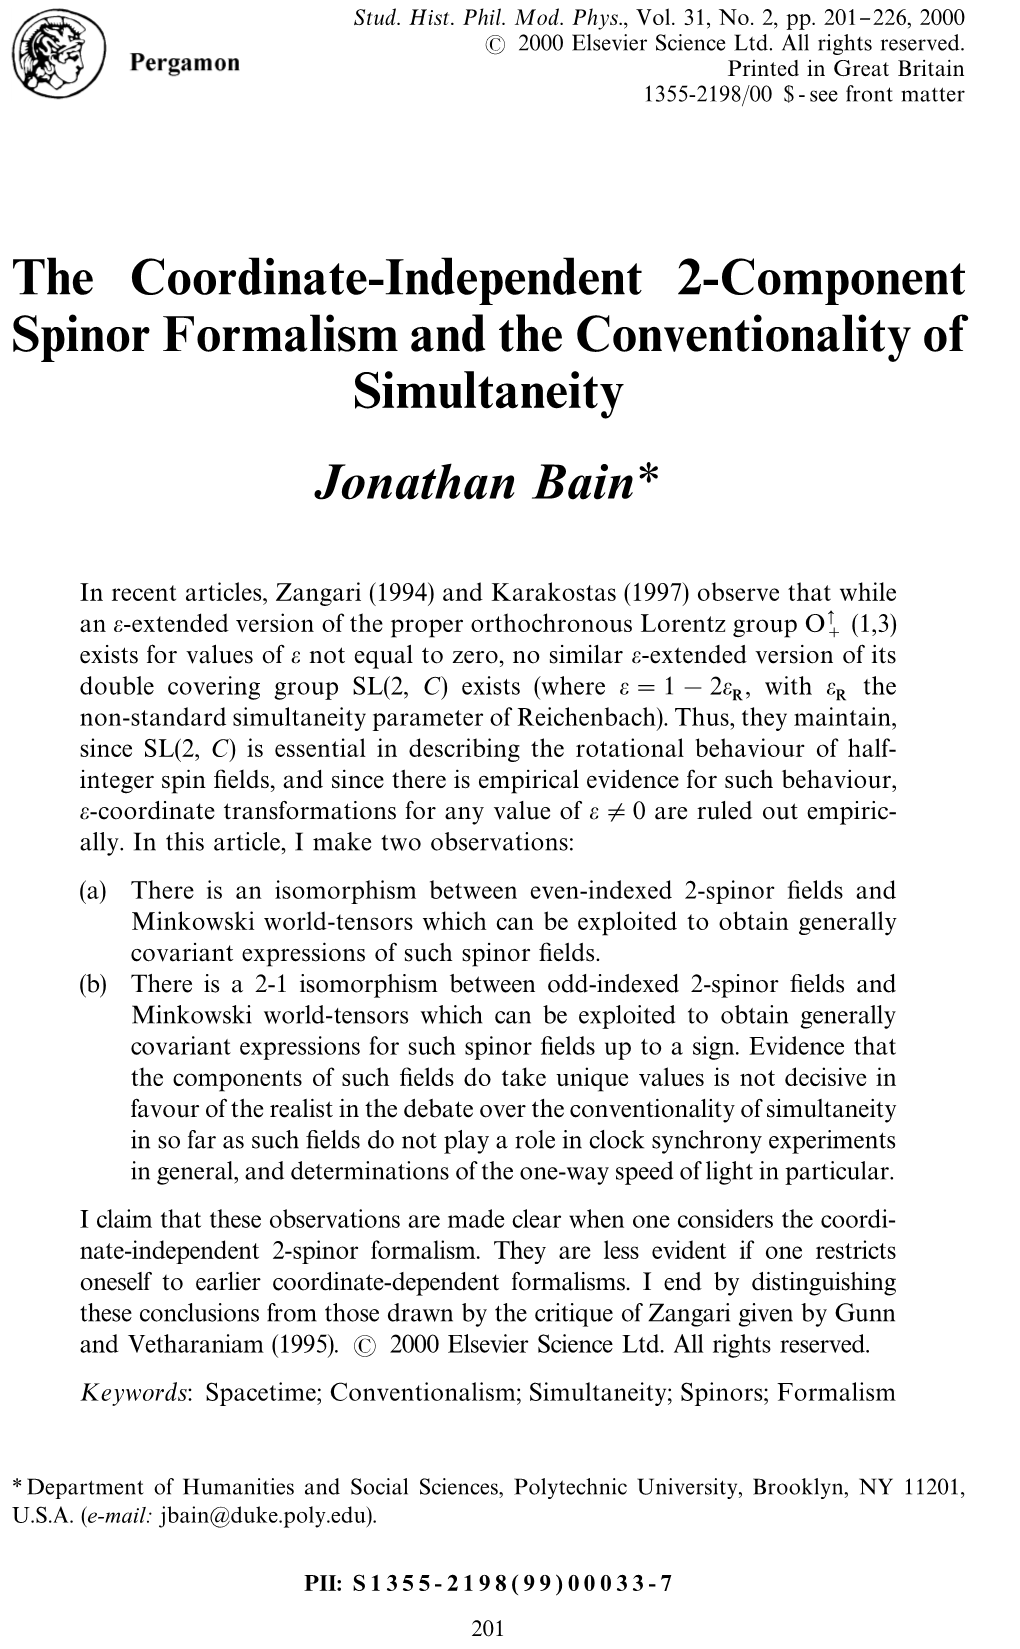 The Coordinate-Independent 2-Component Spinor Formalism and the Conventionality of Simultaneity Jonathan Bain*